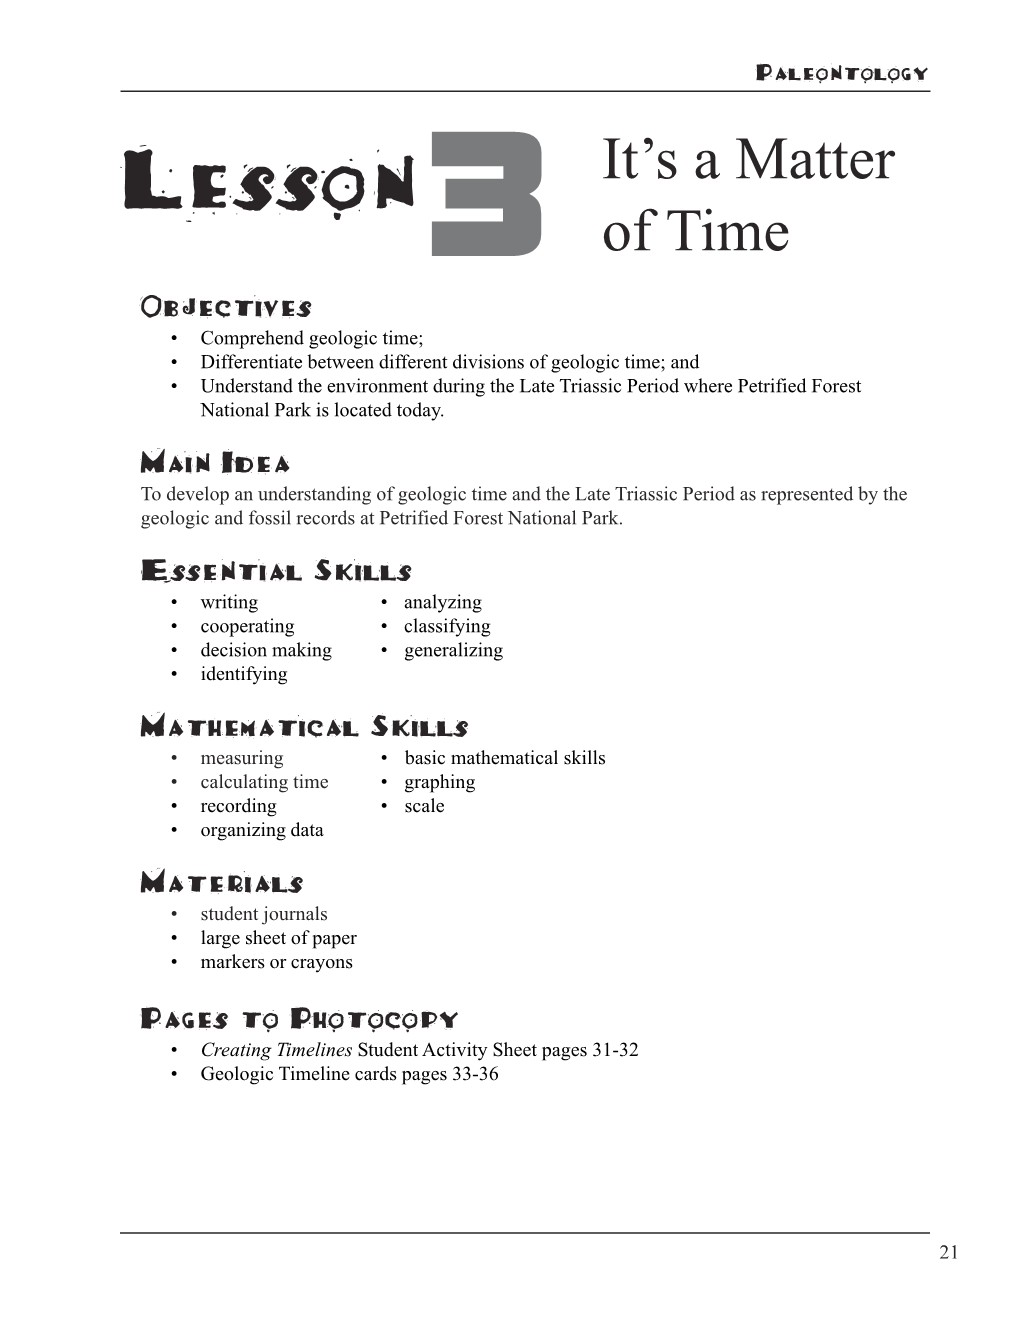 Lesson3 It's a Matter of Time